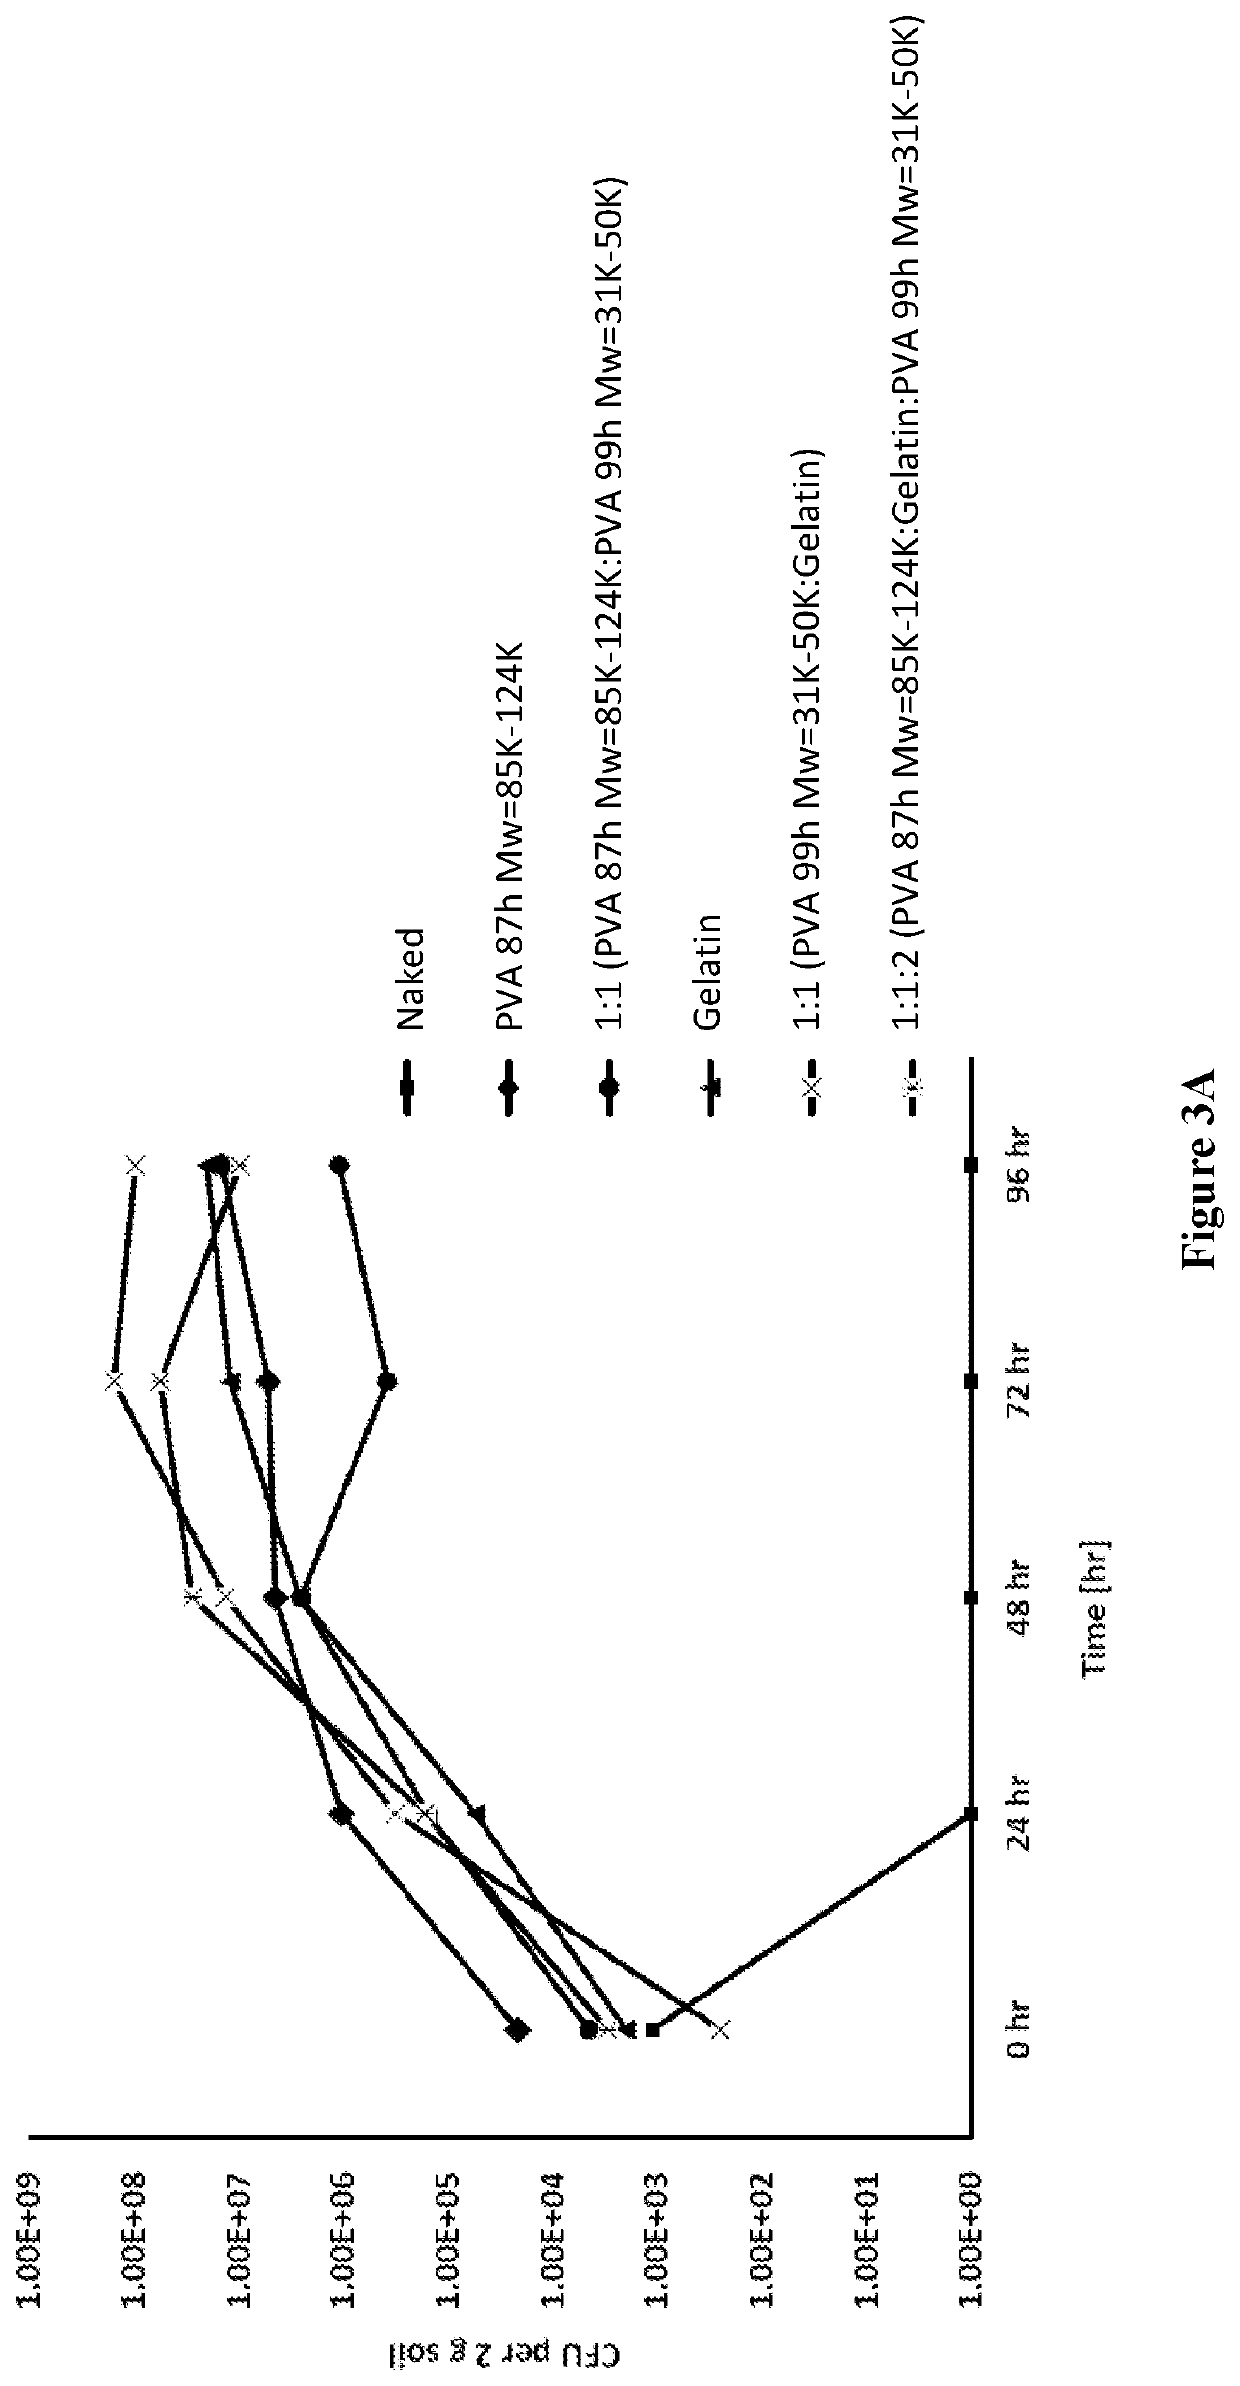 Encapsulated microorganisms and methods of using same